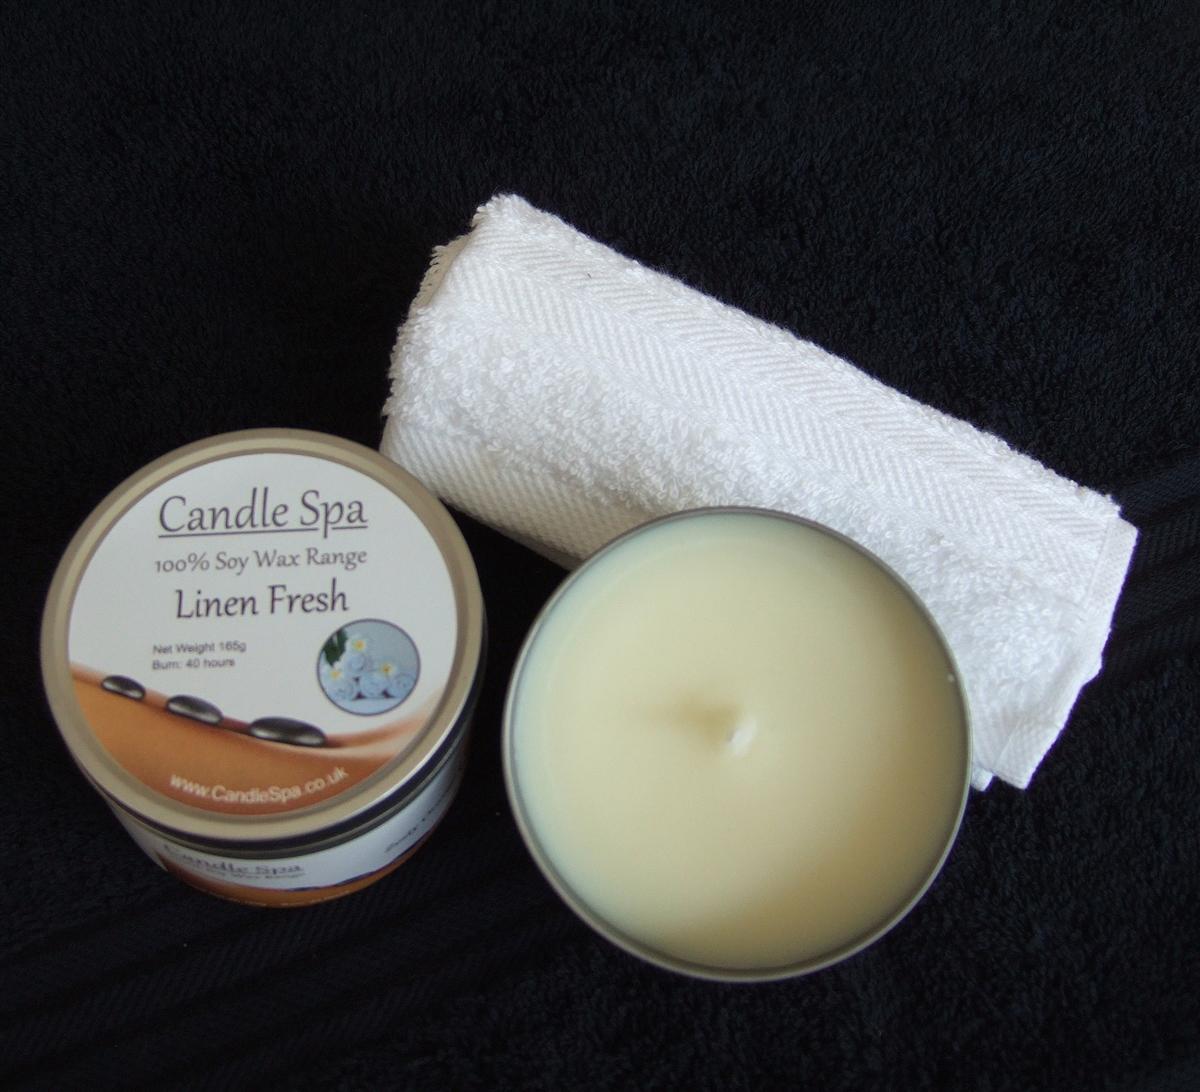 Candle Spa Linen Fresh Tin Candle